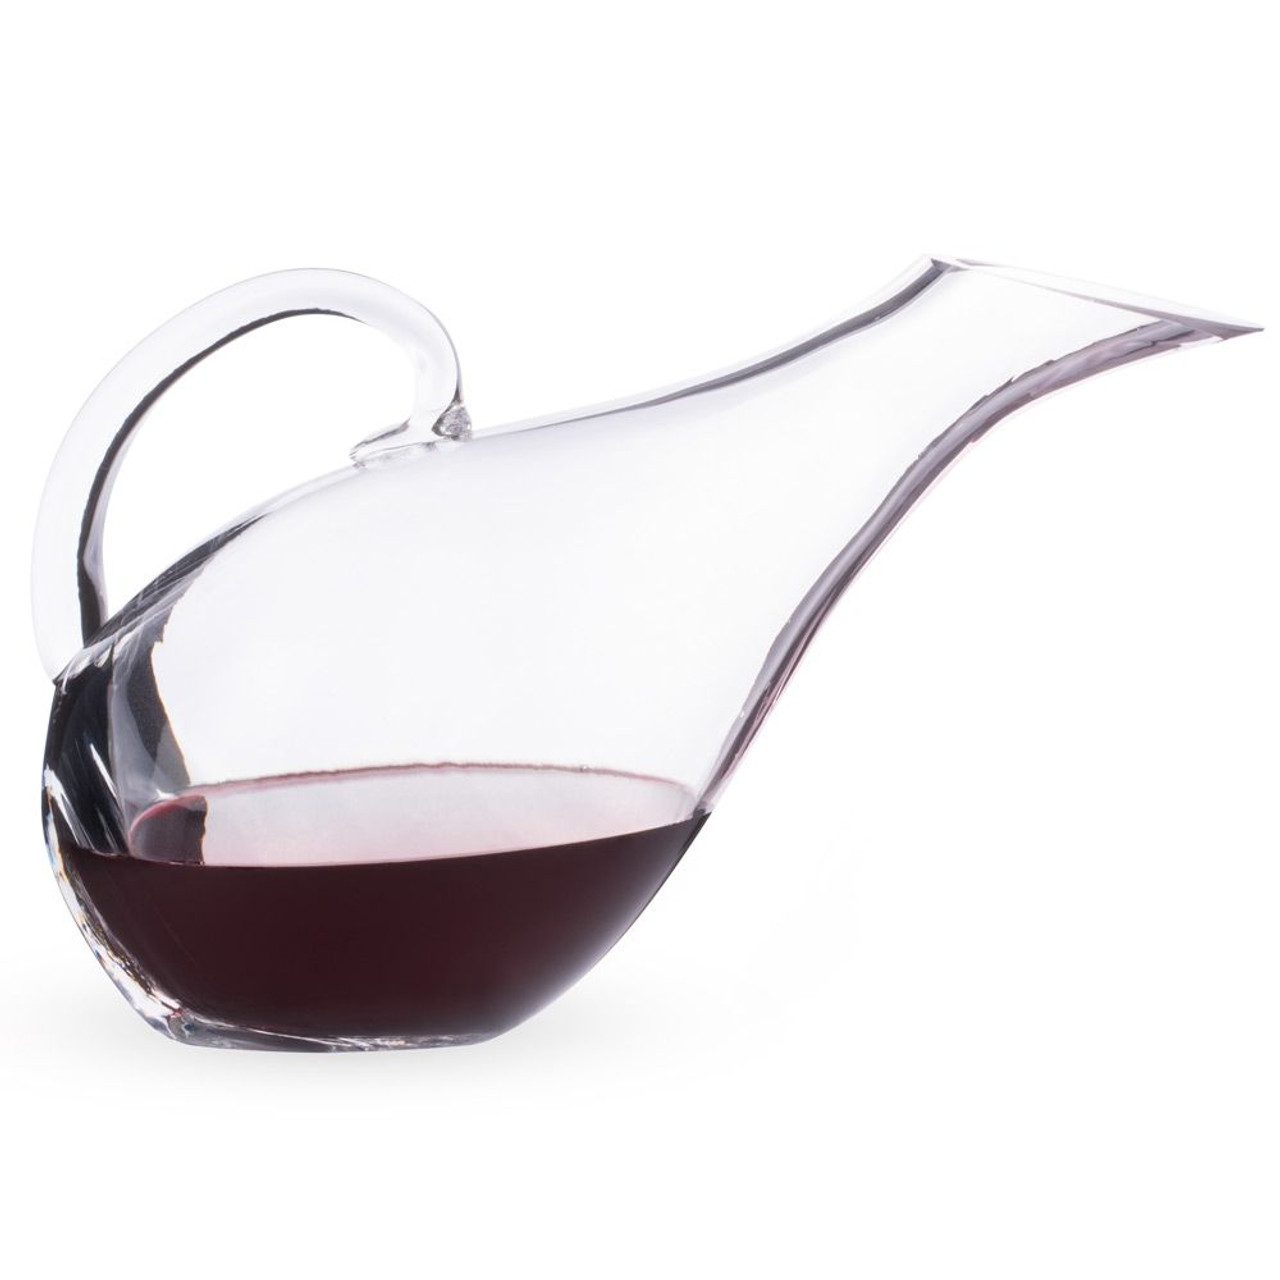 https://cdn11.bigcommerce.com/s-cznxq08r7/images/stencil/1280x1280/products/2629/619/2395_hand-blown-glass-broad-bowl-wine-decanter-with-handle-53oz03__98590.1590763722.jpg?c=1